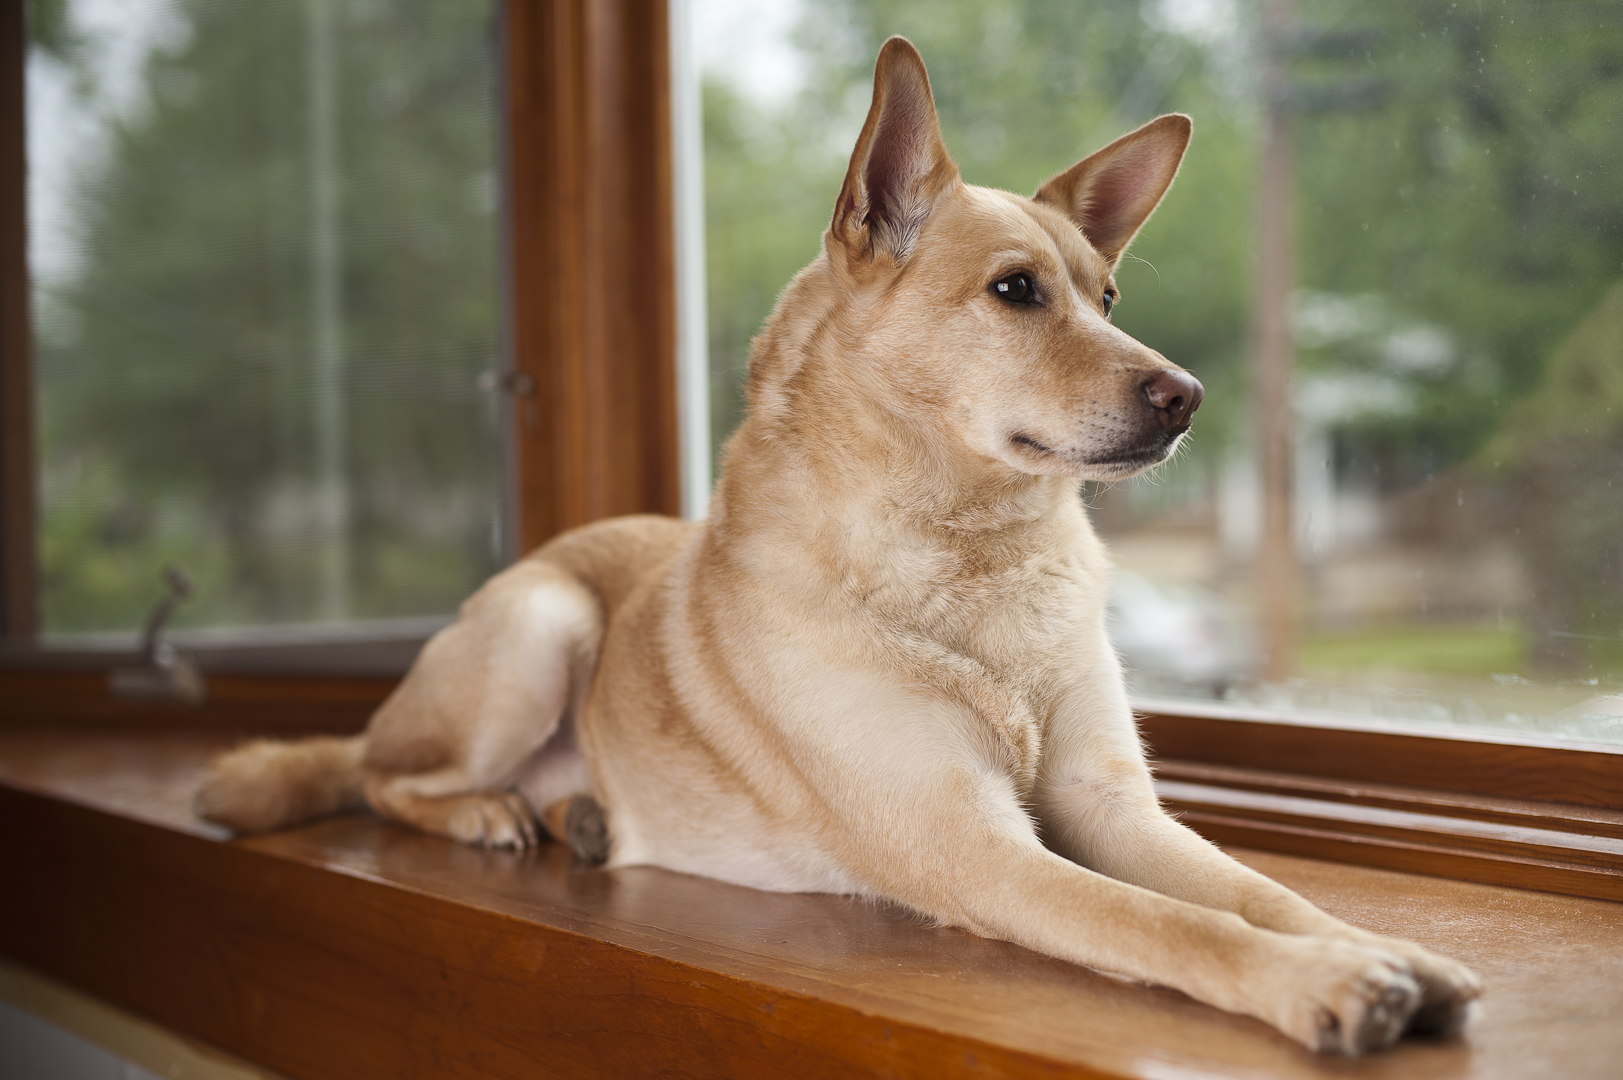 How to Make Your Home Safer for Your Pet